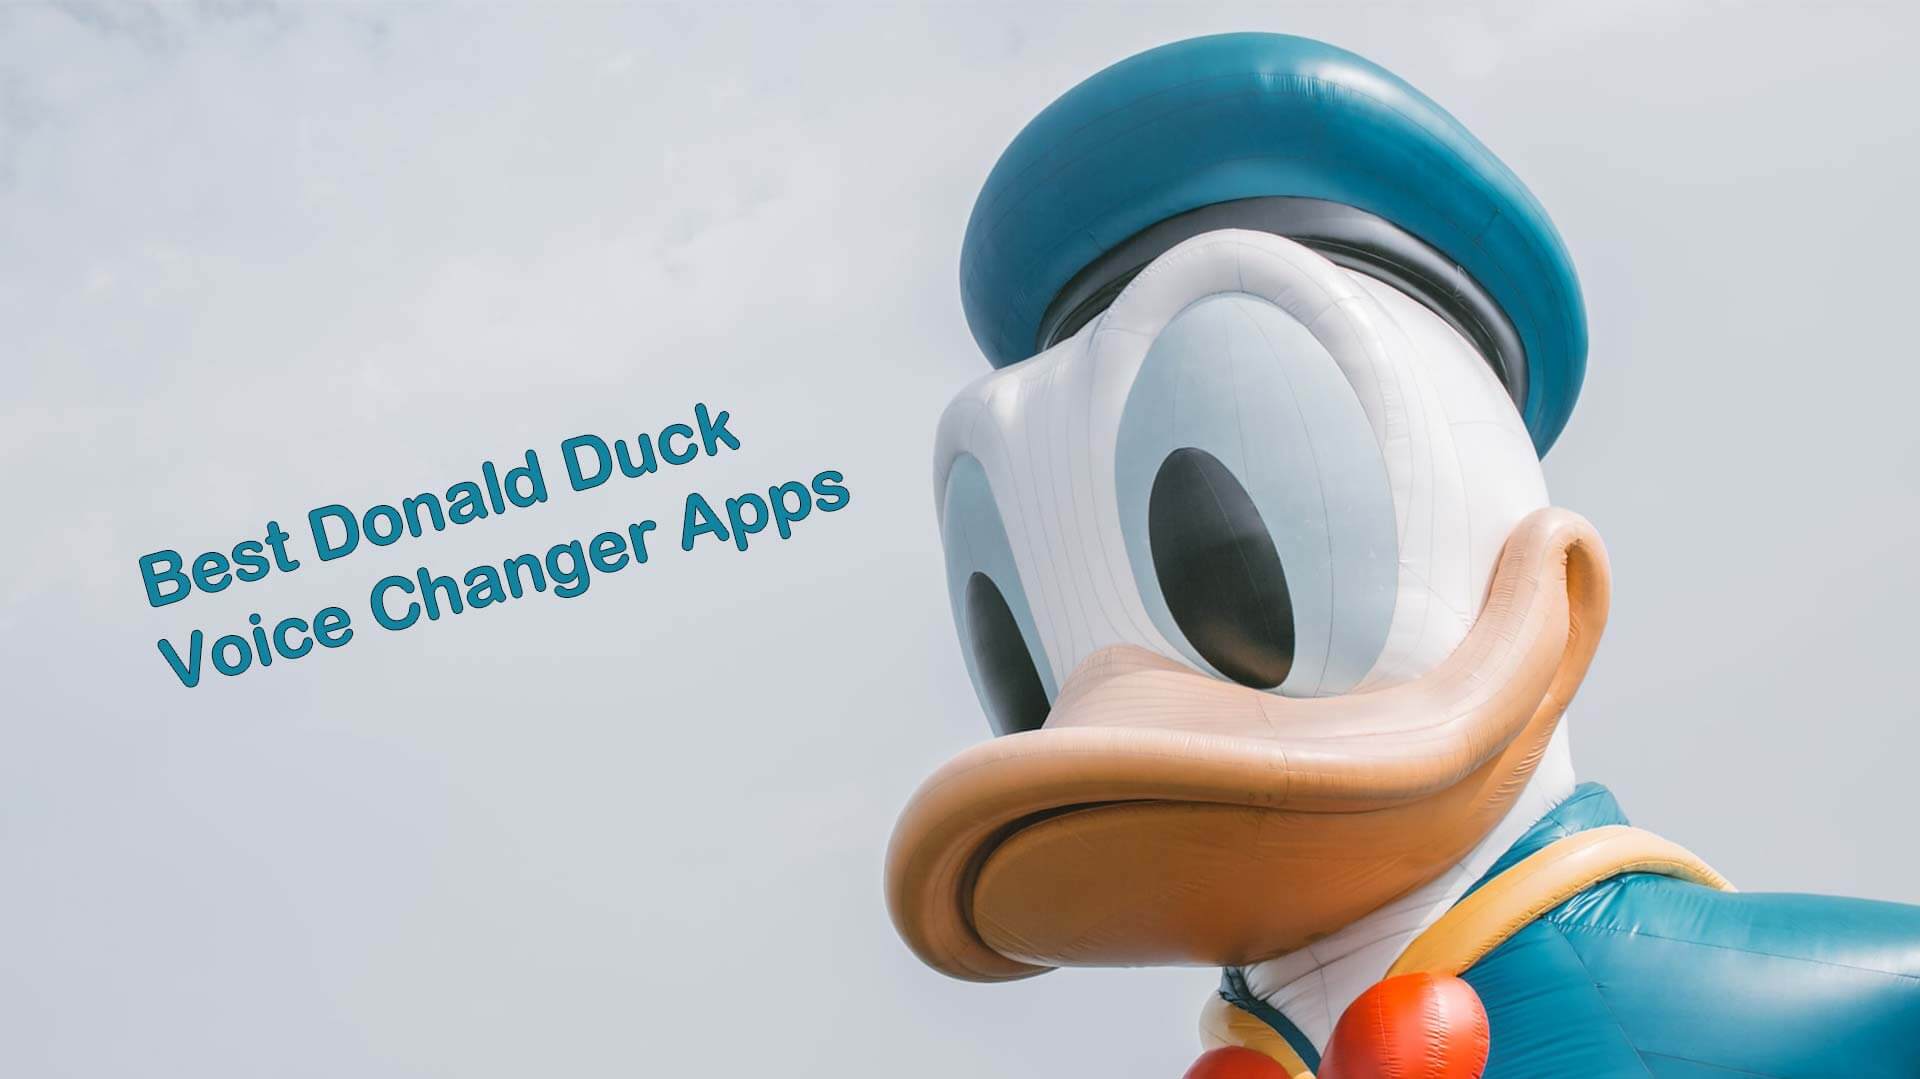 Donald Duck Voice Changer Cover